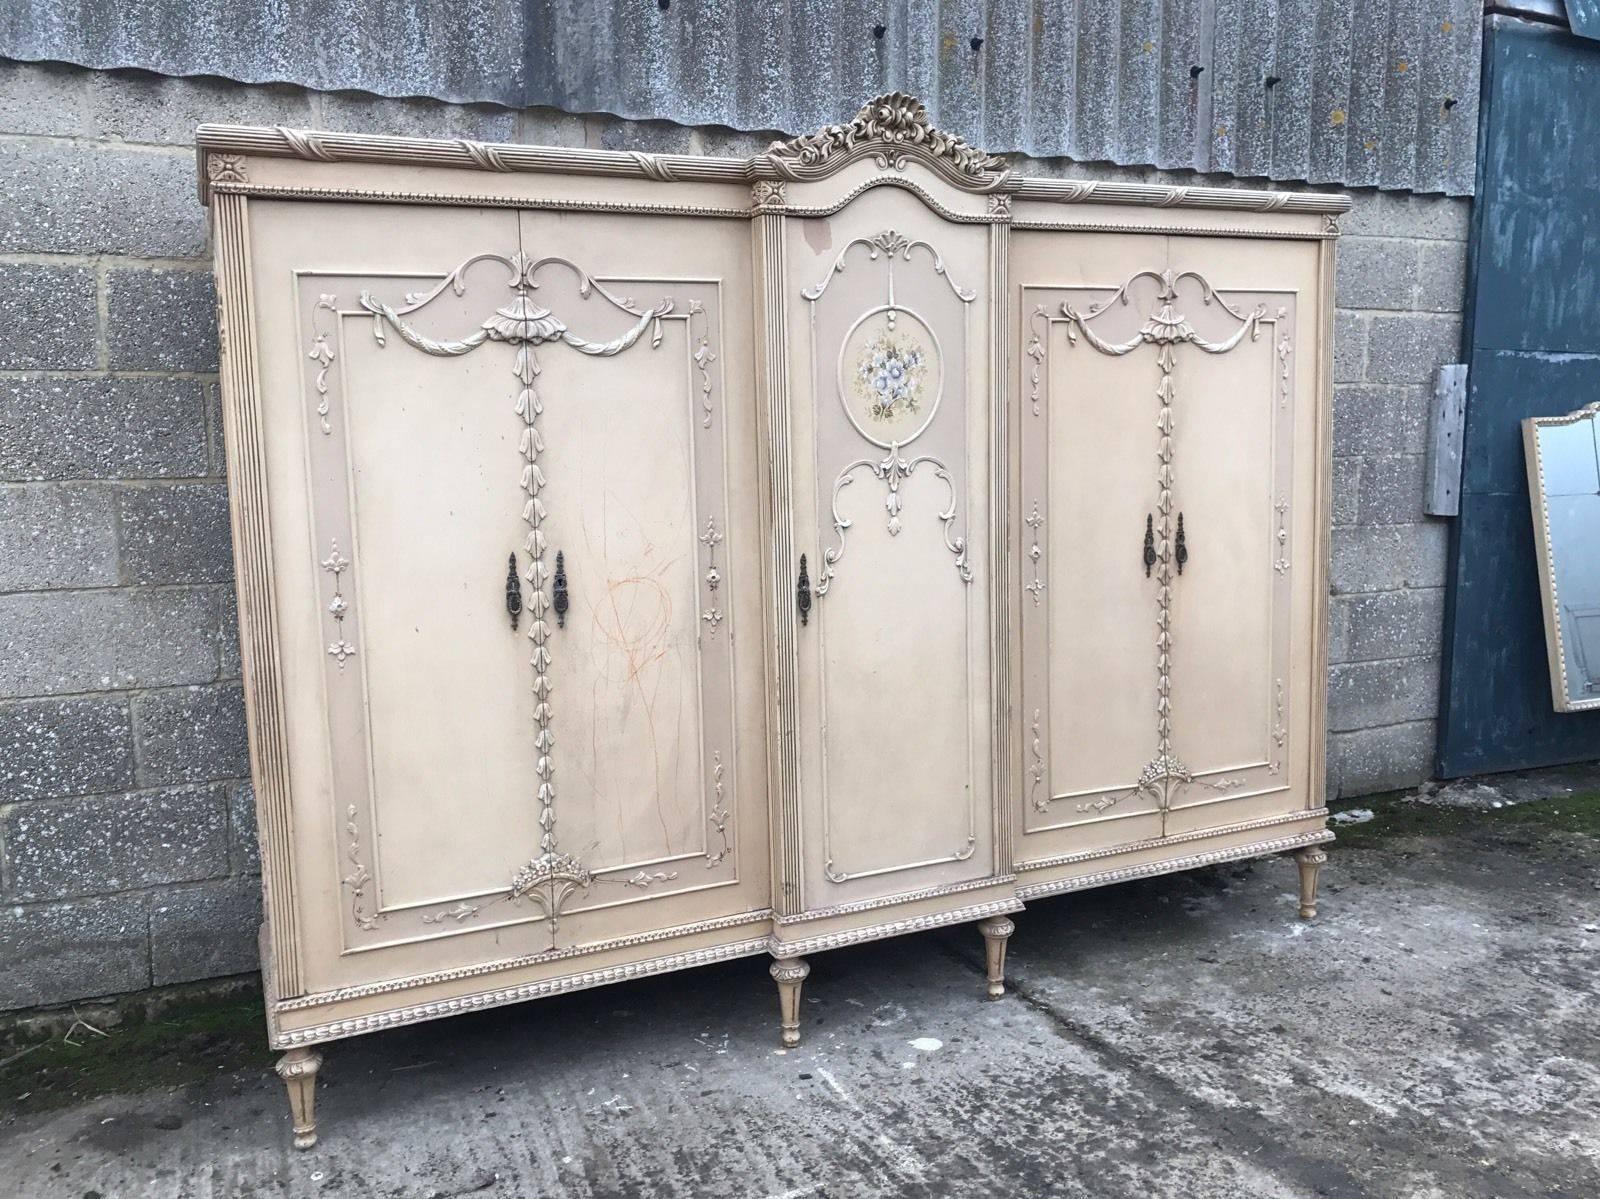 This is a very rare five-door French armoire. Very hard to come by, rarely seen for sale anywhere in the world!

With its original paint and original floral paint work, it really is a one off.

Splits down in to several sections for ease of